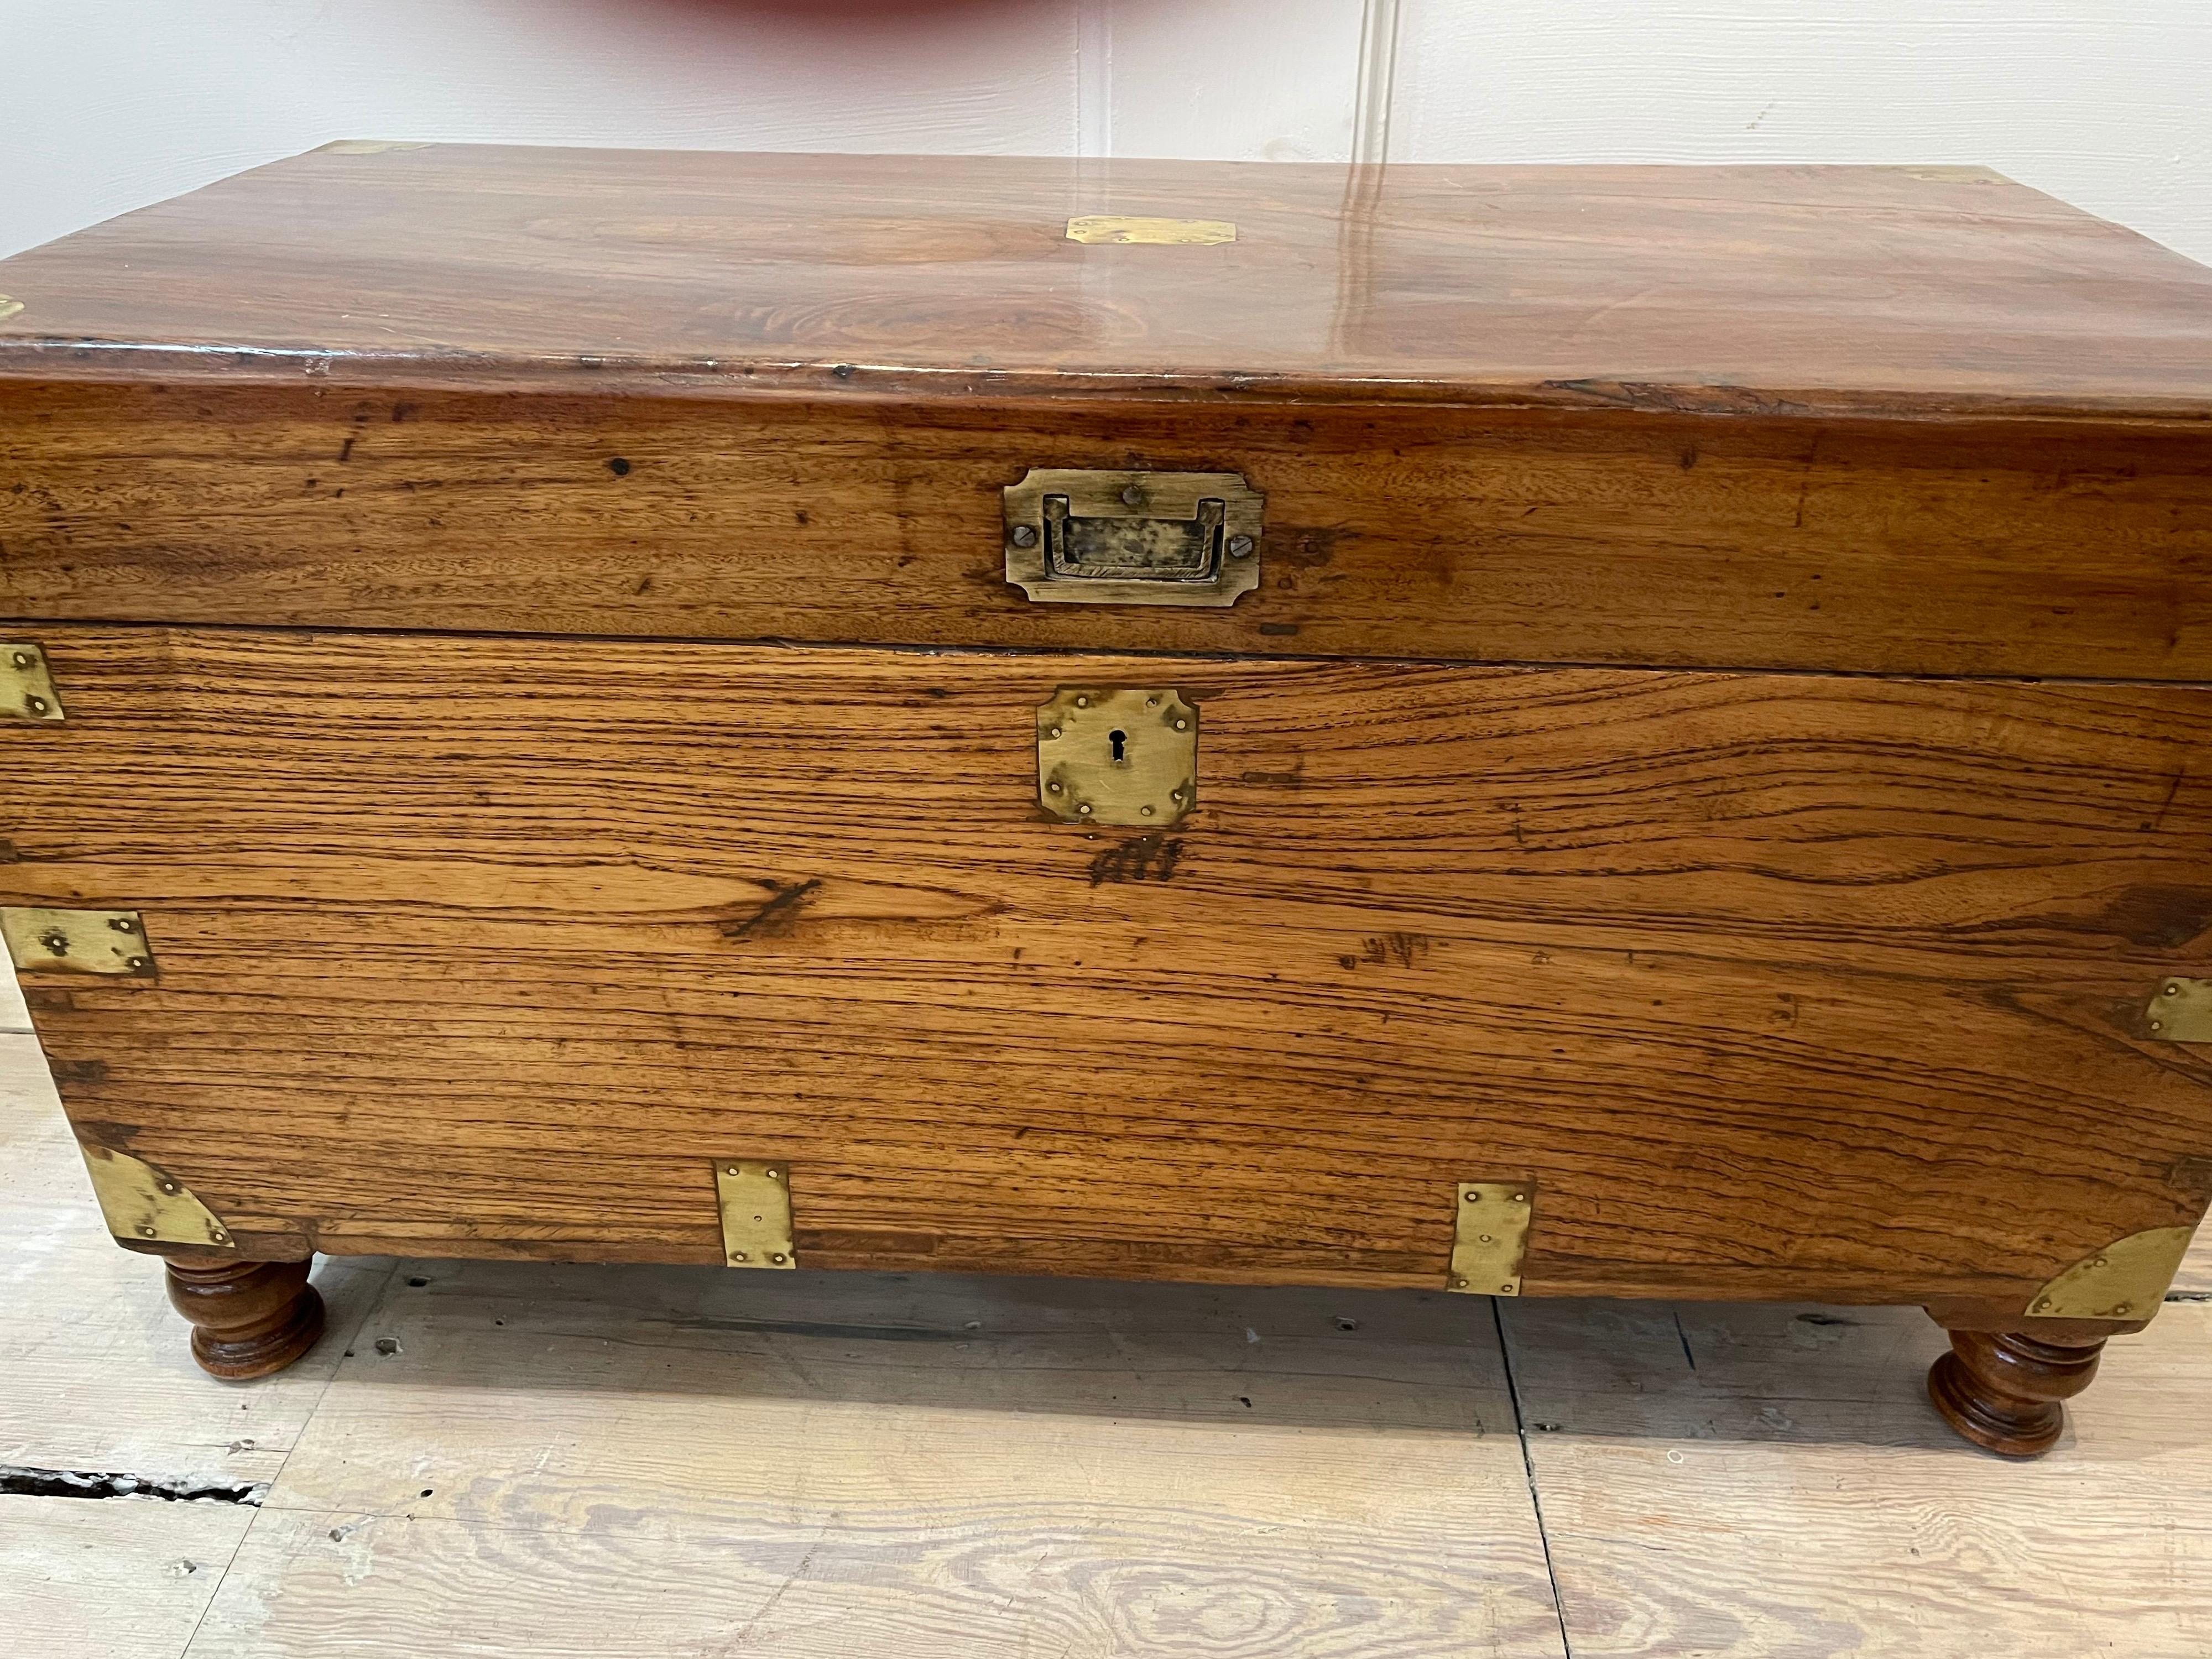 A classic British Campaign camphor wood sea chest with brass strap corners and brass handles, dovetail joins, from the late 19th century, refinished. Working lock (replaced) and key with added turned feet making for a better use as a coffee table